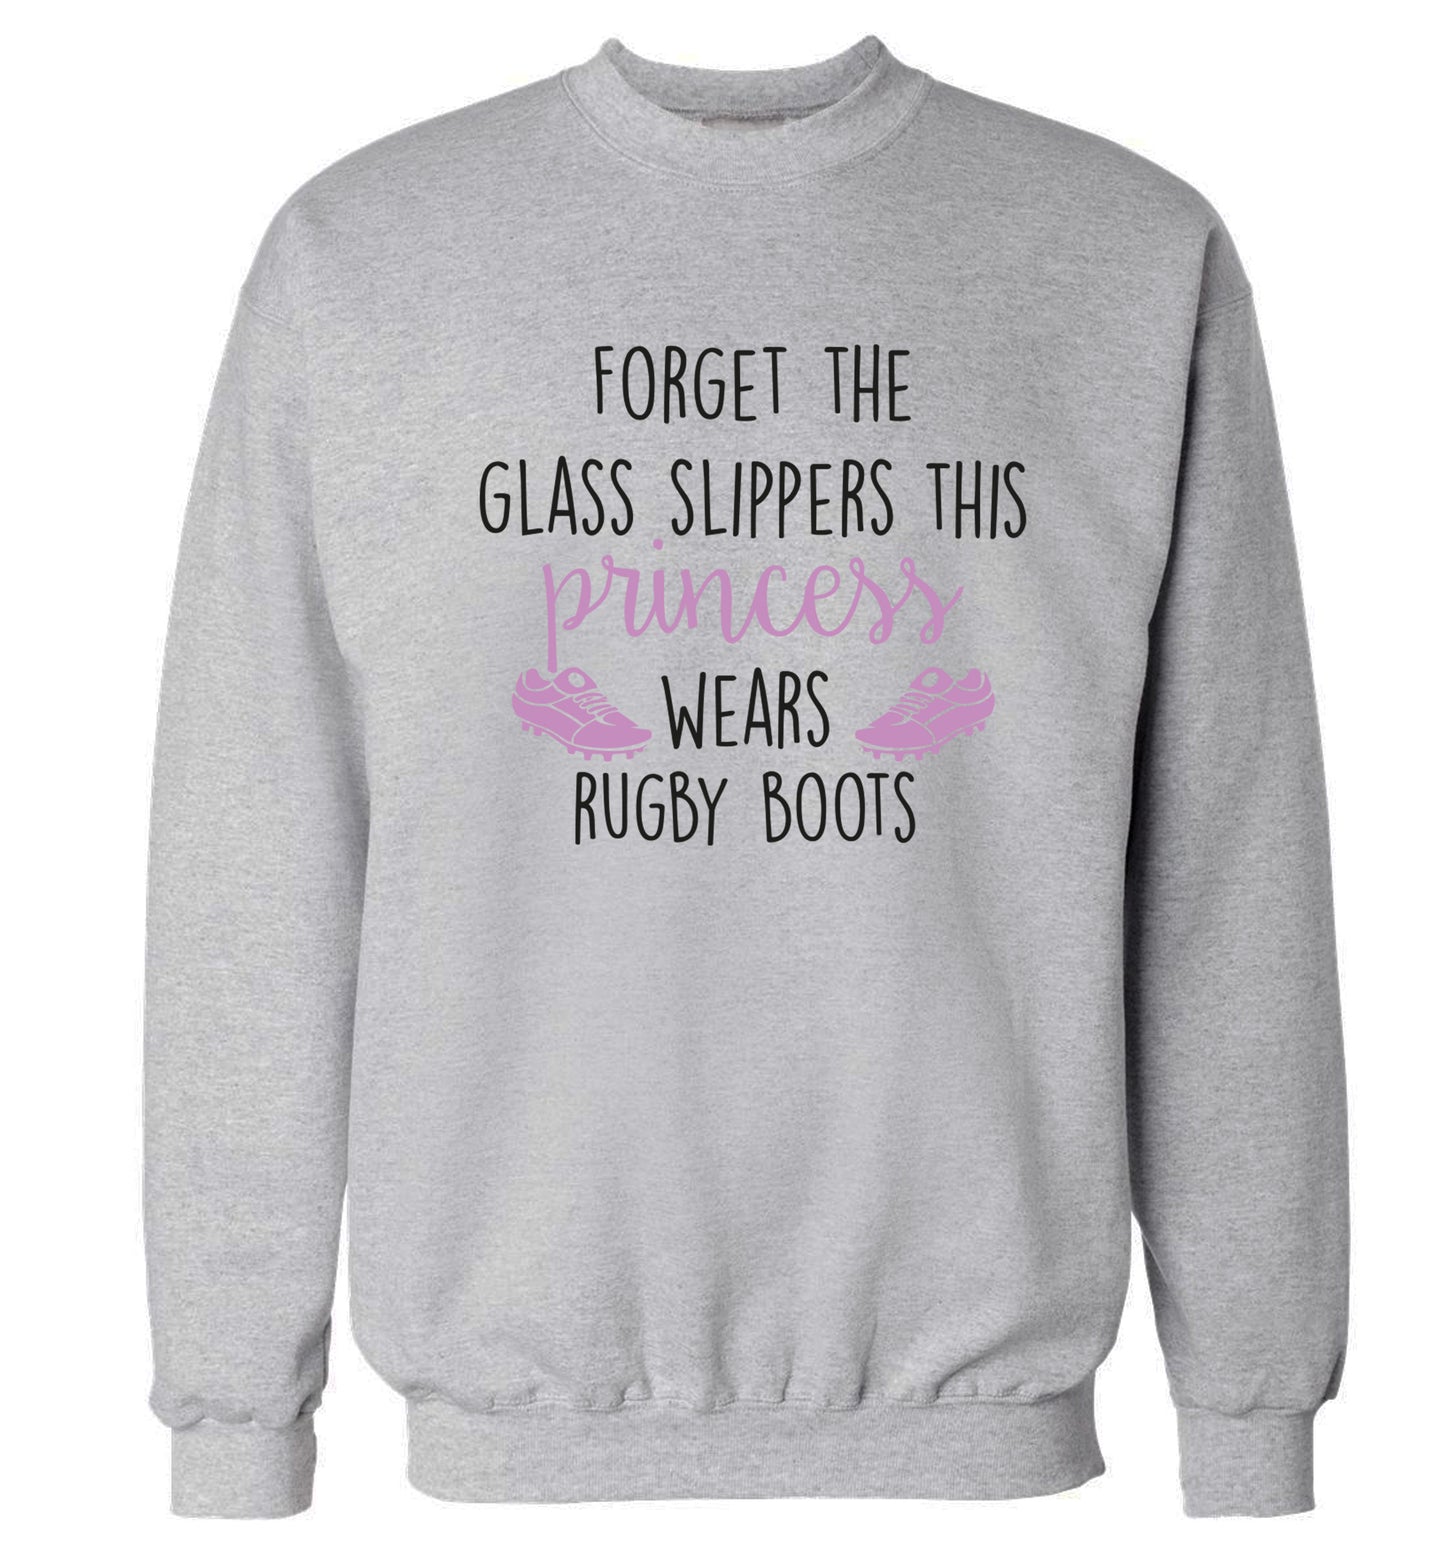 Forget the glass slippers this princess wears rugby boots Adult's unisex grey Sweater 2XL